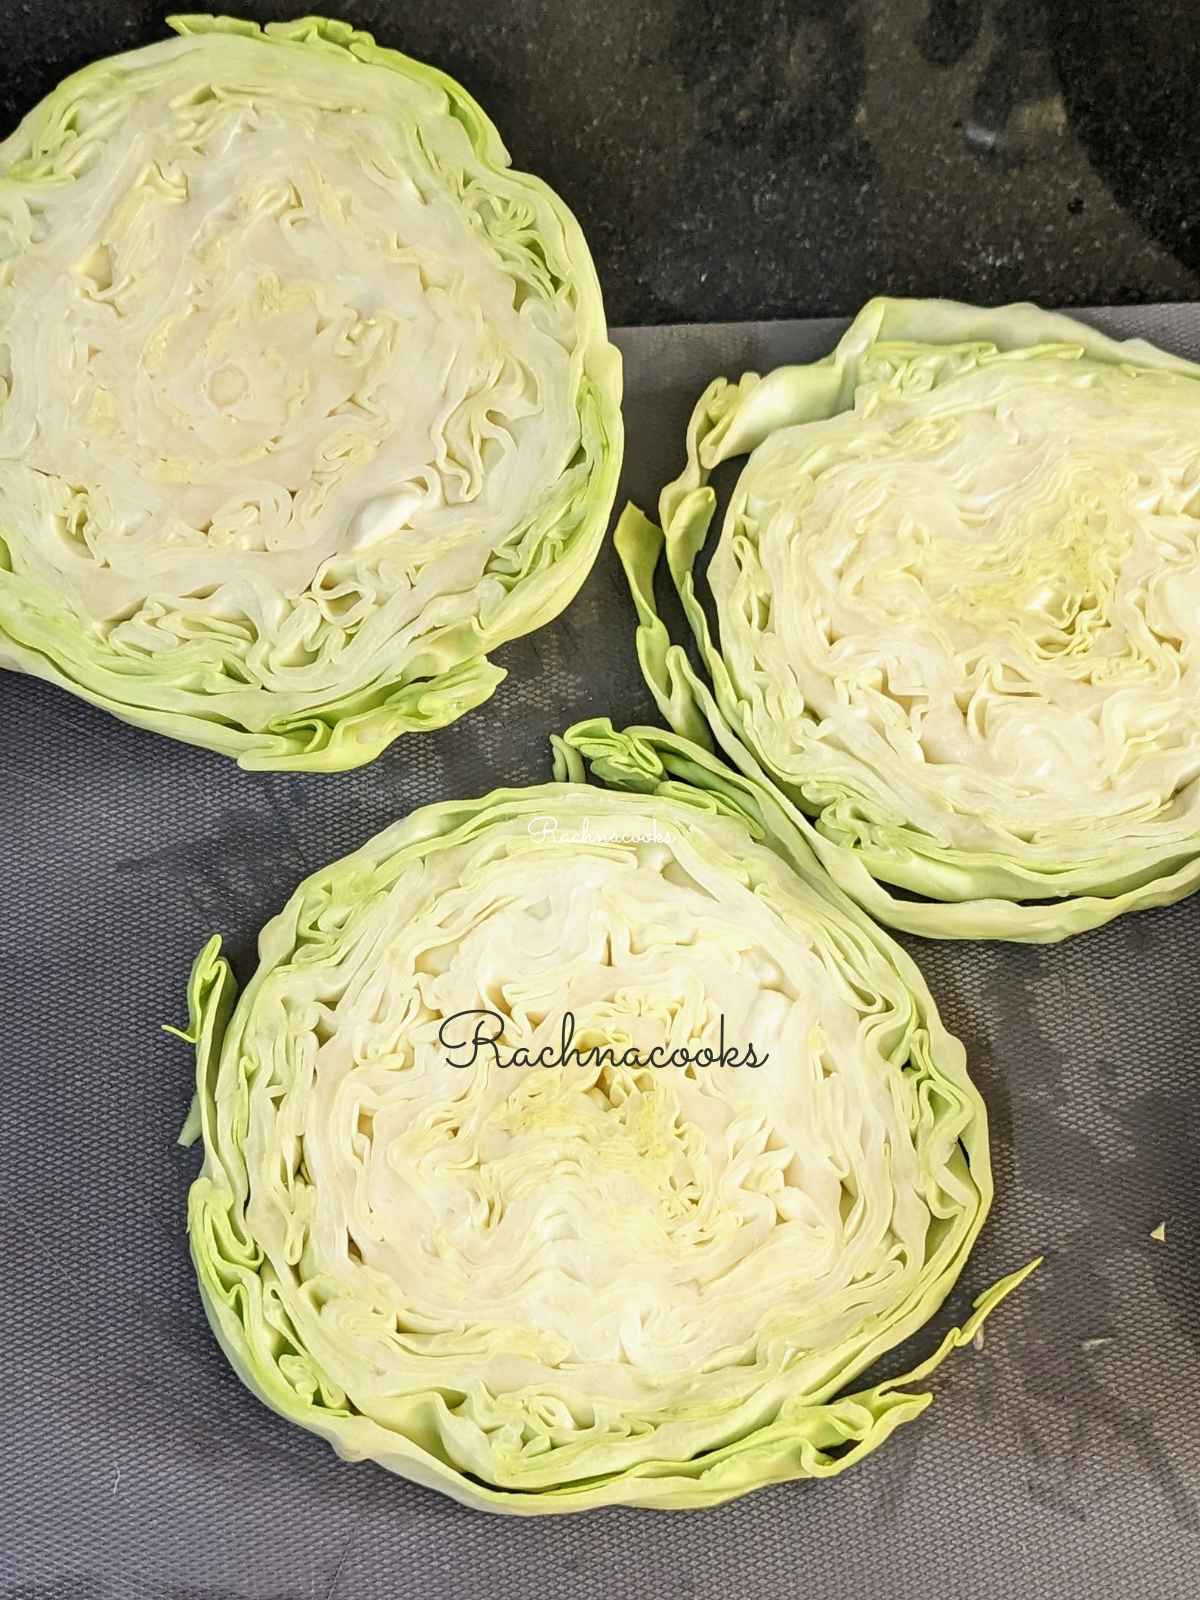 3 cabbage steaks on a chopping surface.